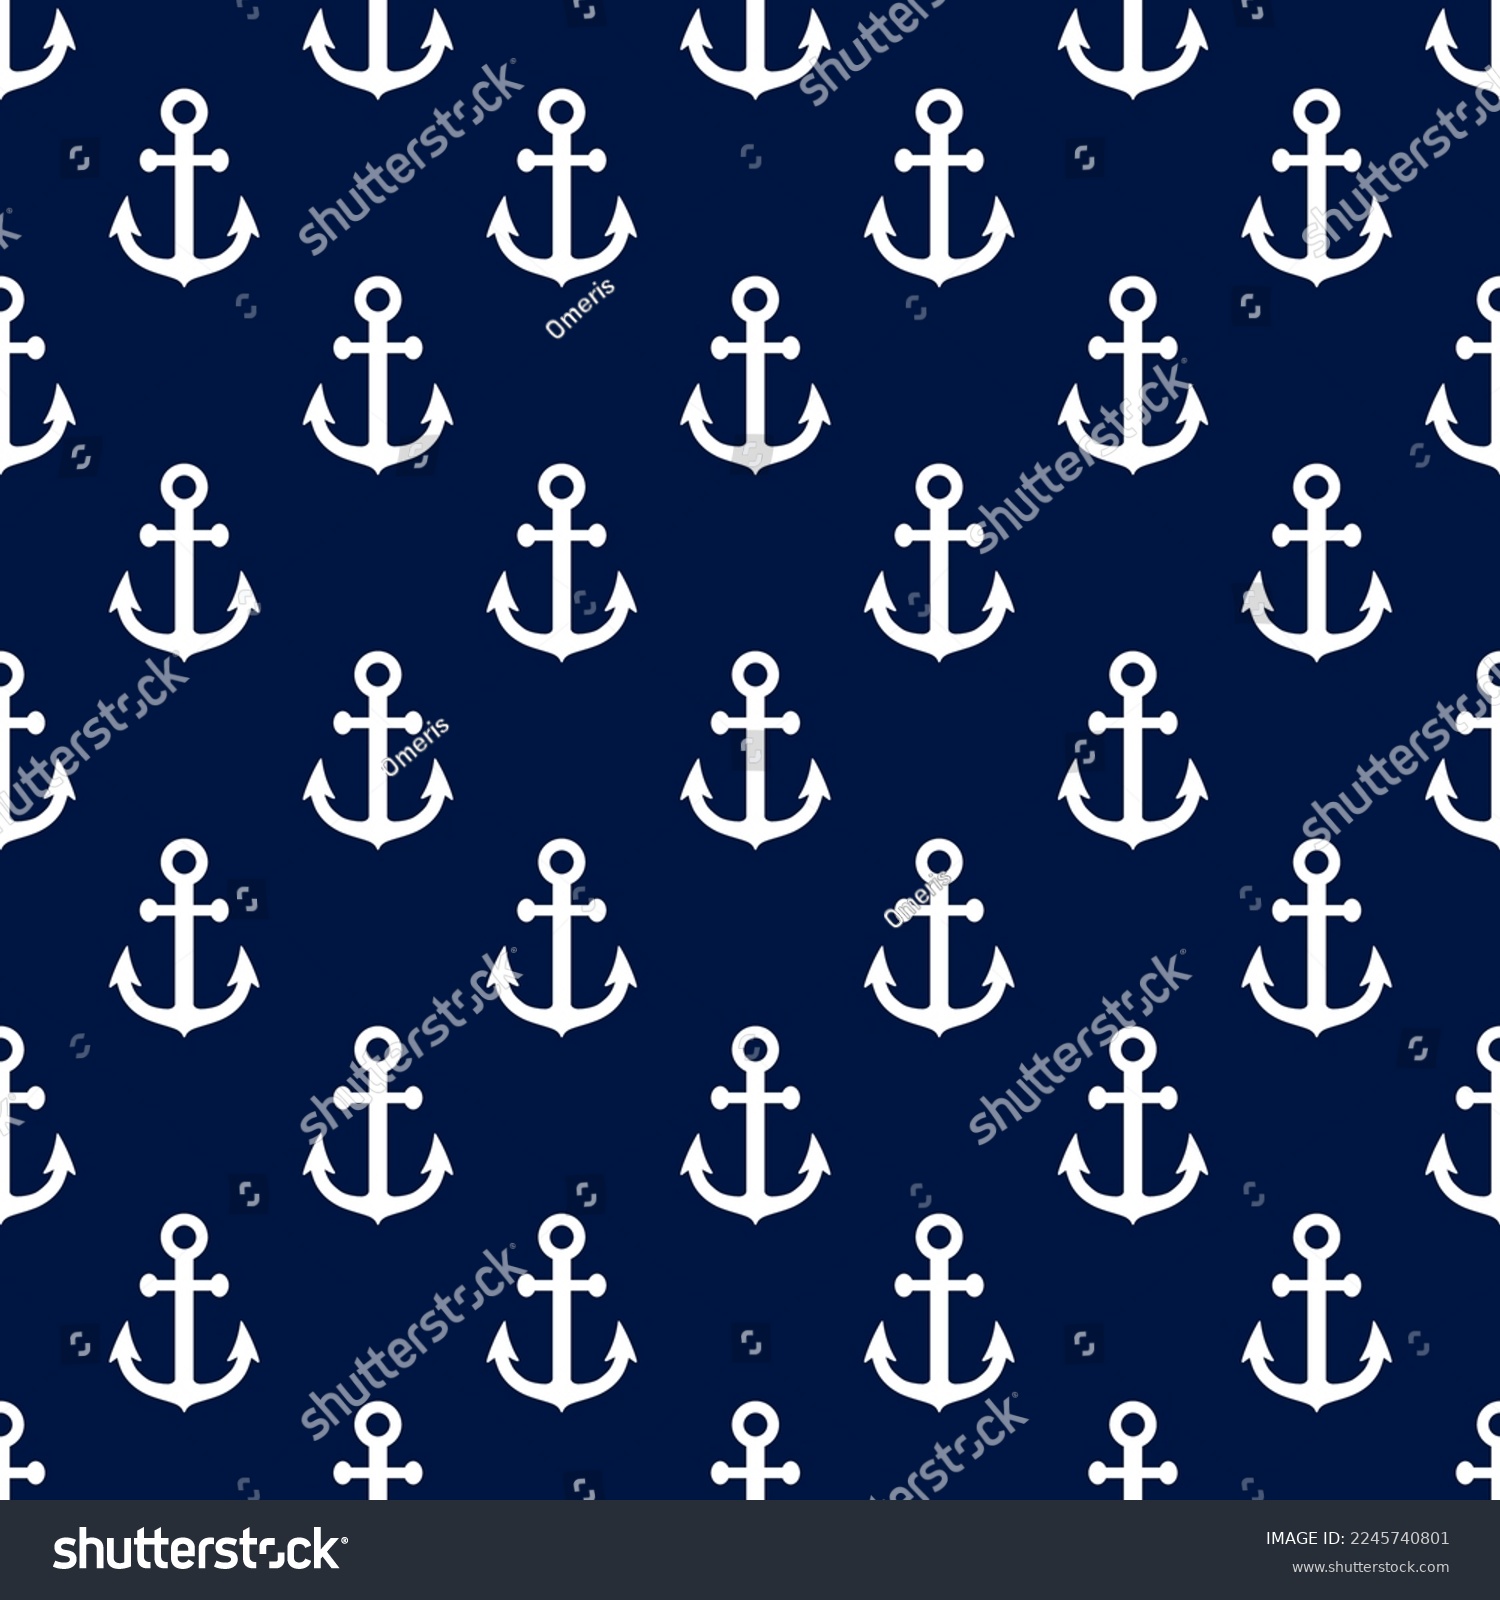 SVG of Anchor seamless pattern. Anchors texture. Repeating symbol boat or ship patern on blue background. Repeated nautical design for prints. Repeat maritime motif. Sailing backdrop. Vector illustration svg